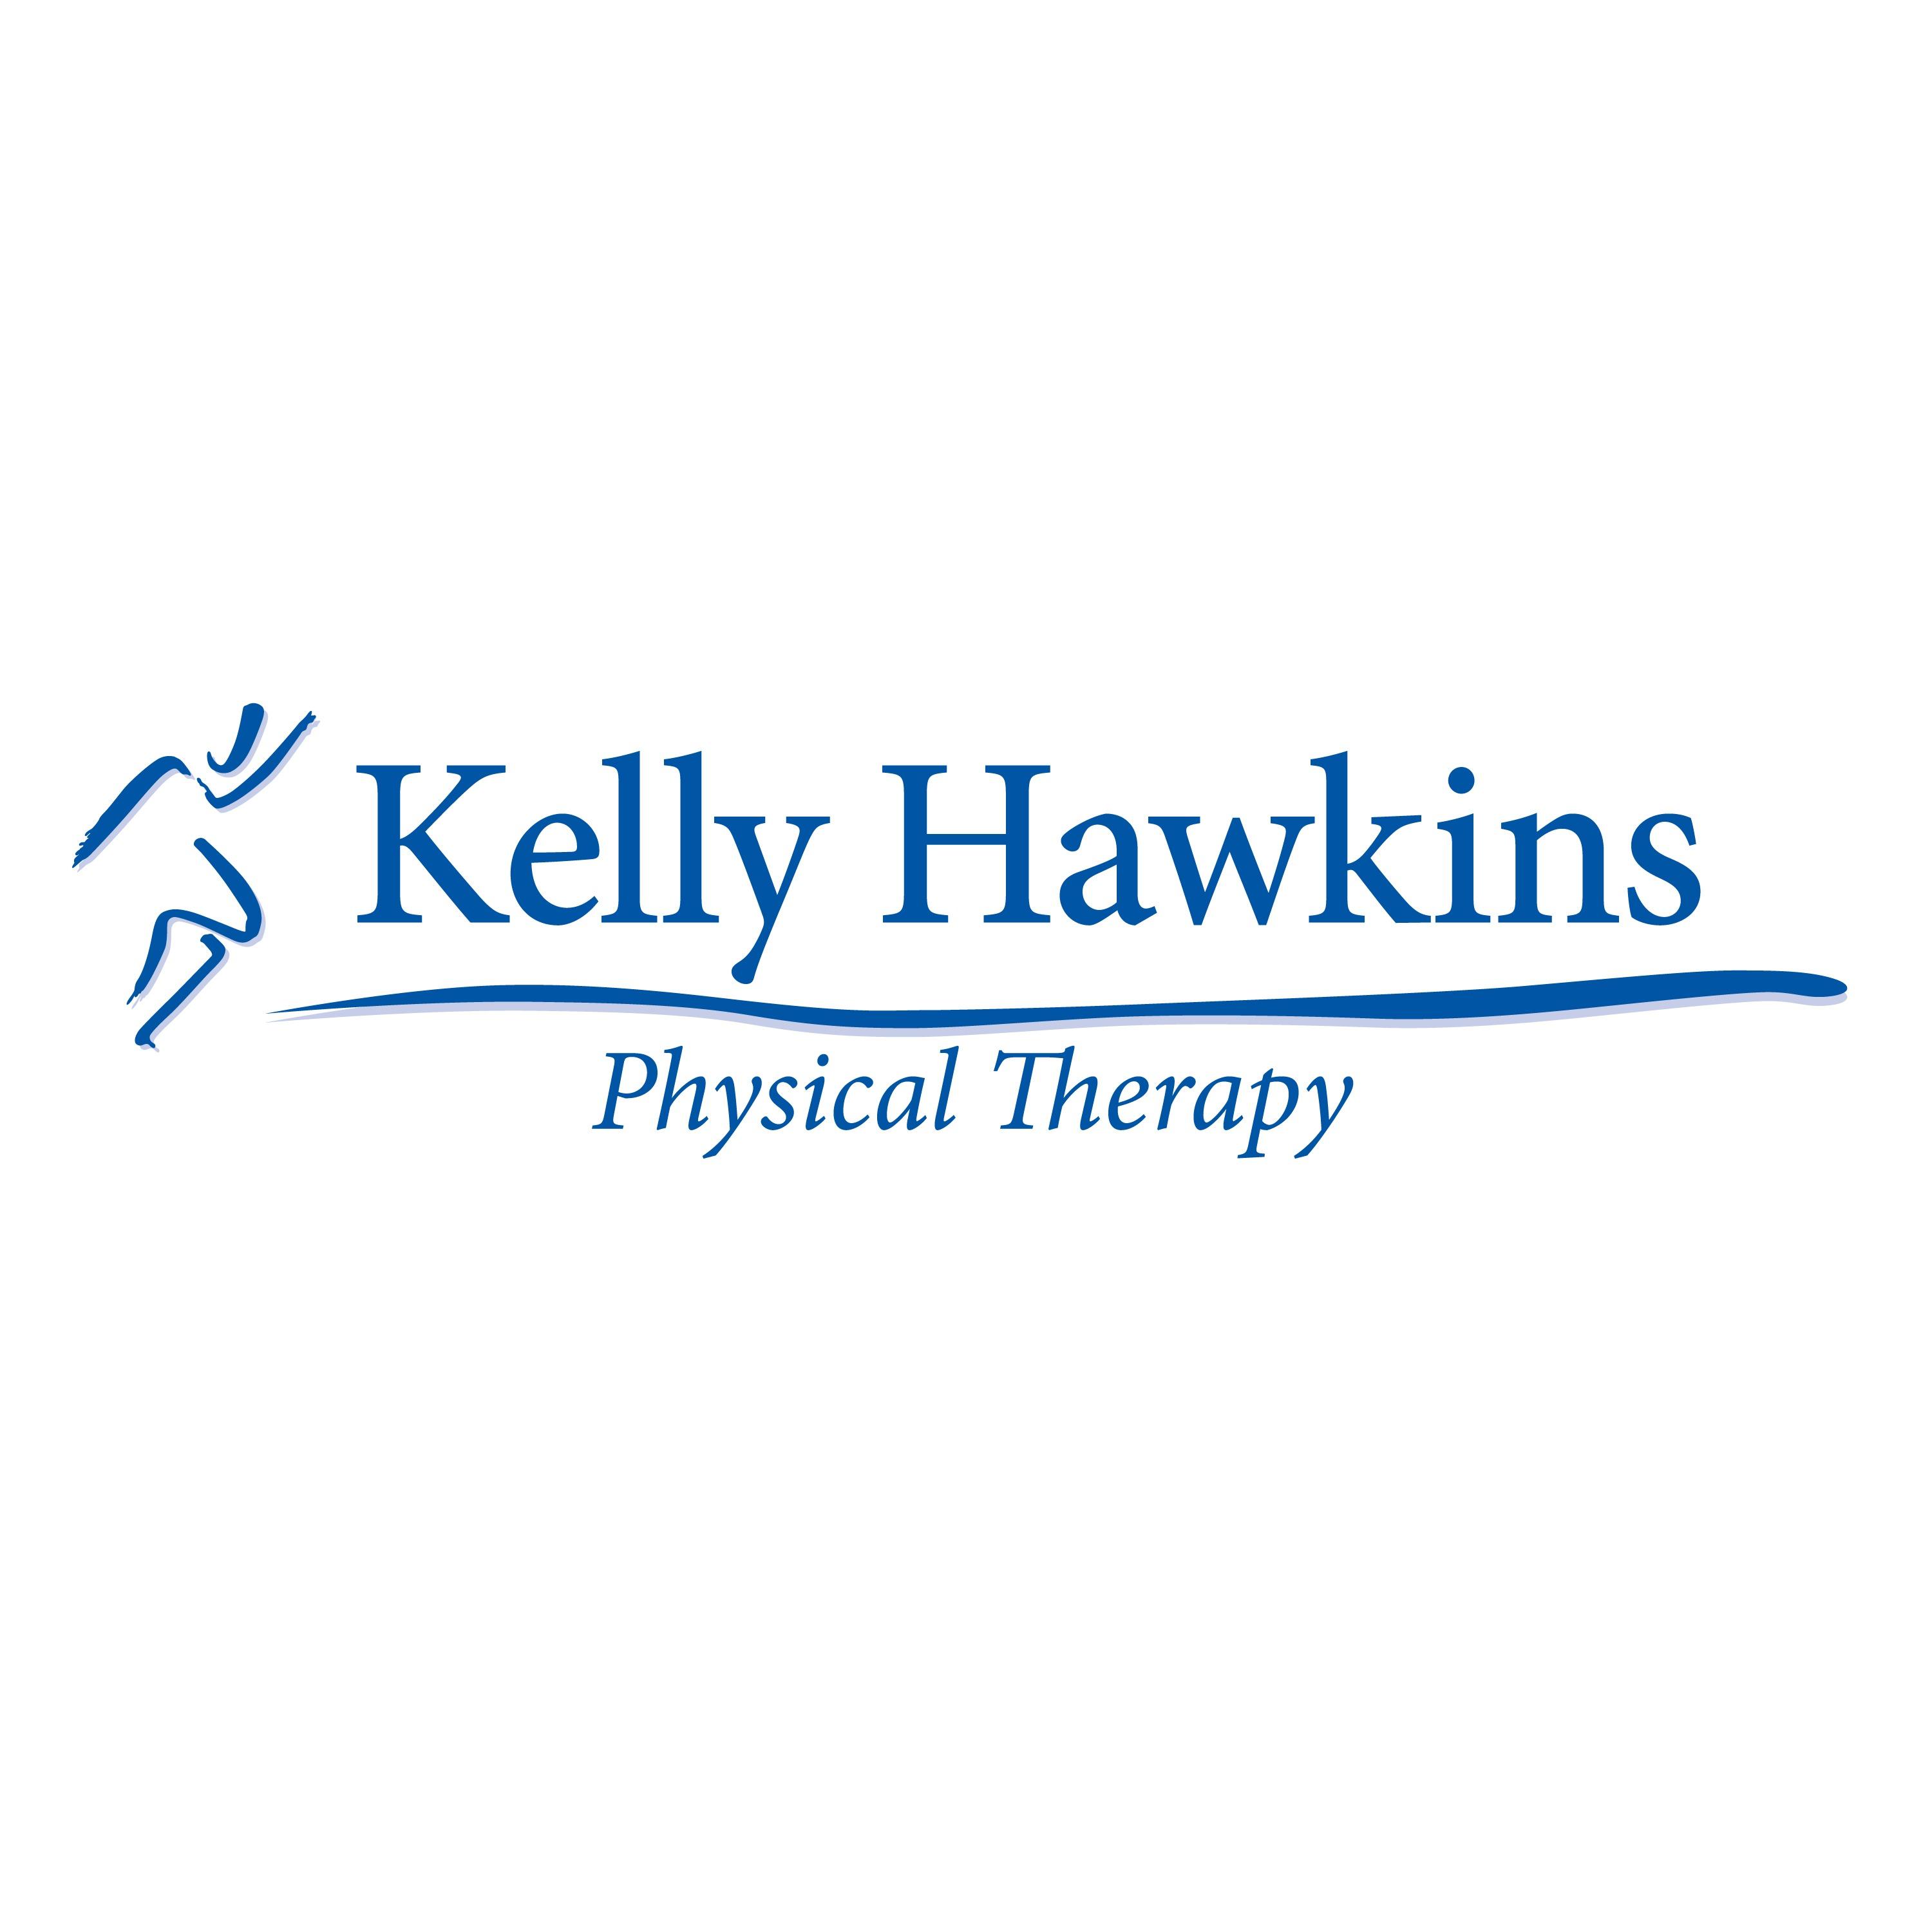 Kelly Hawkins Physical Therapy Logo